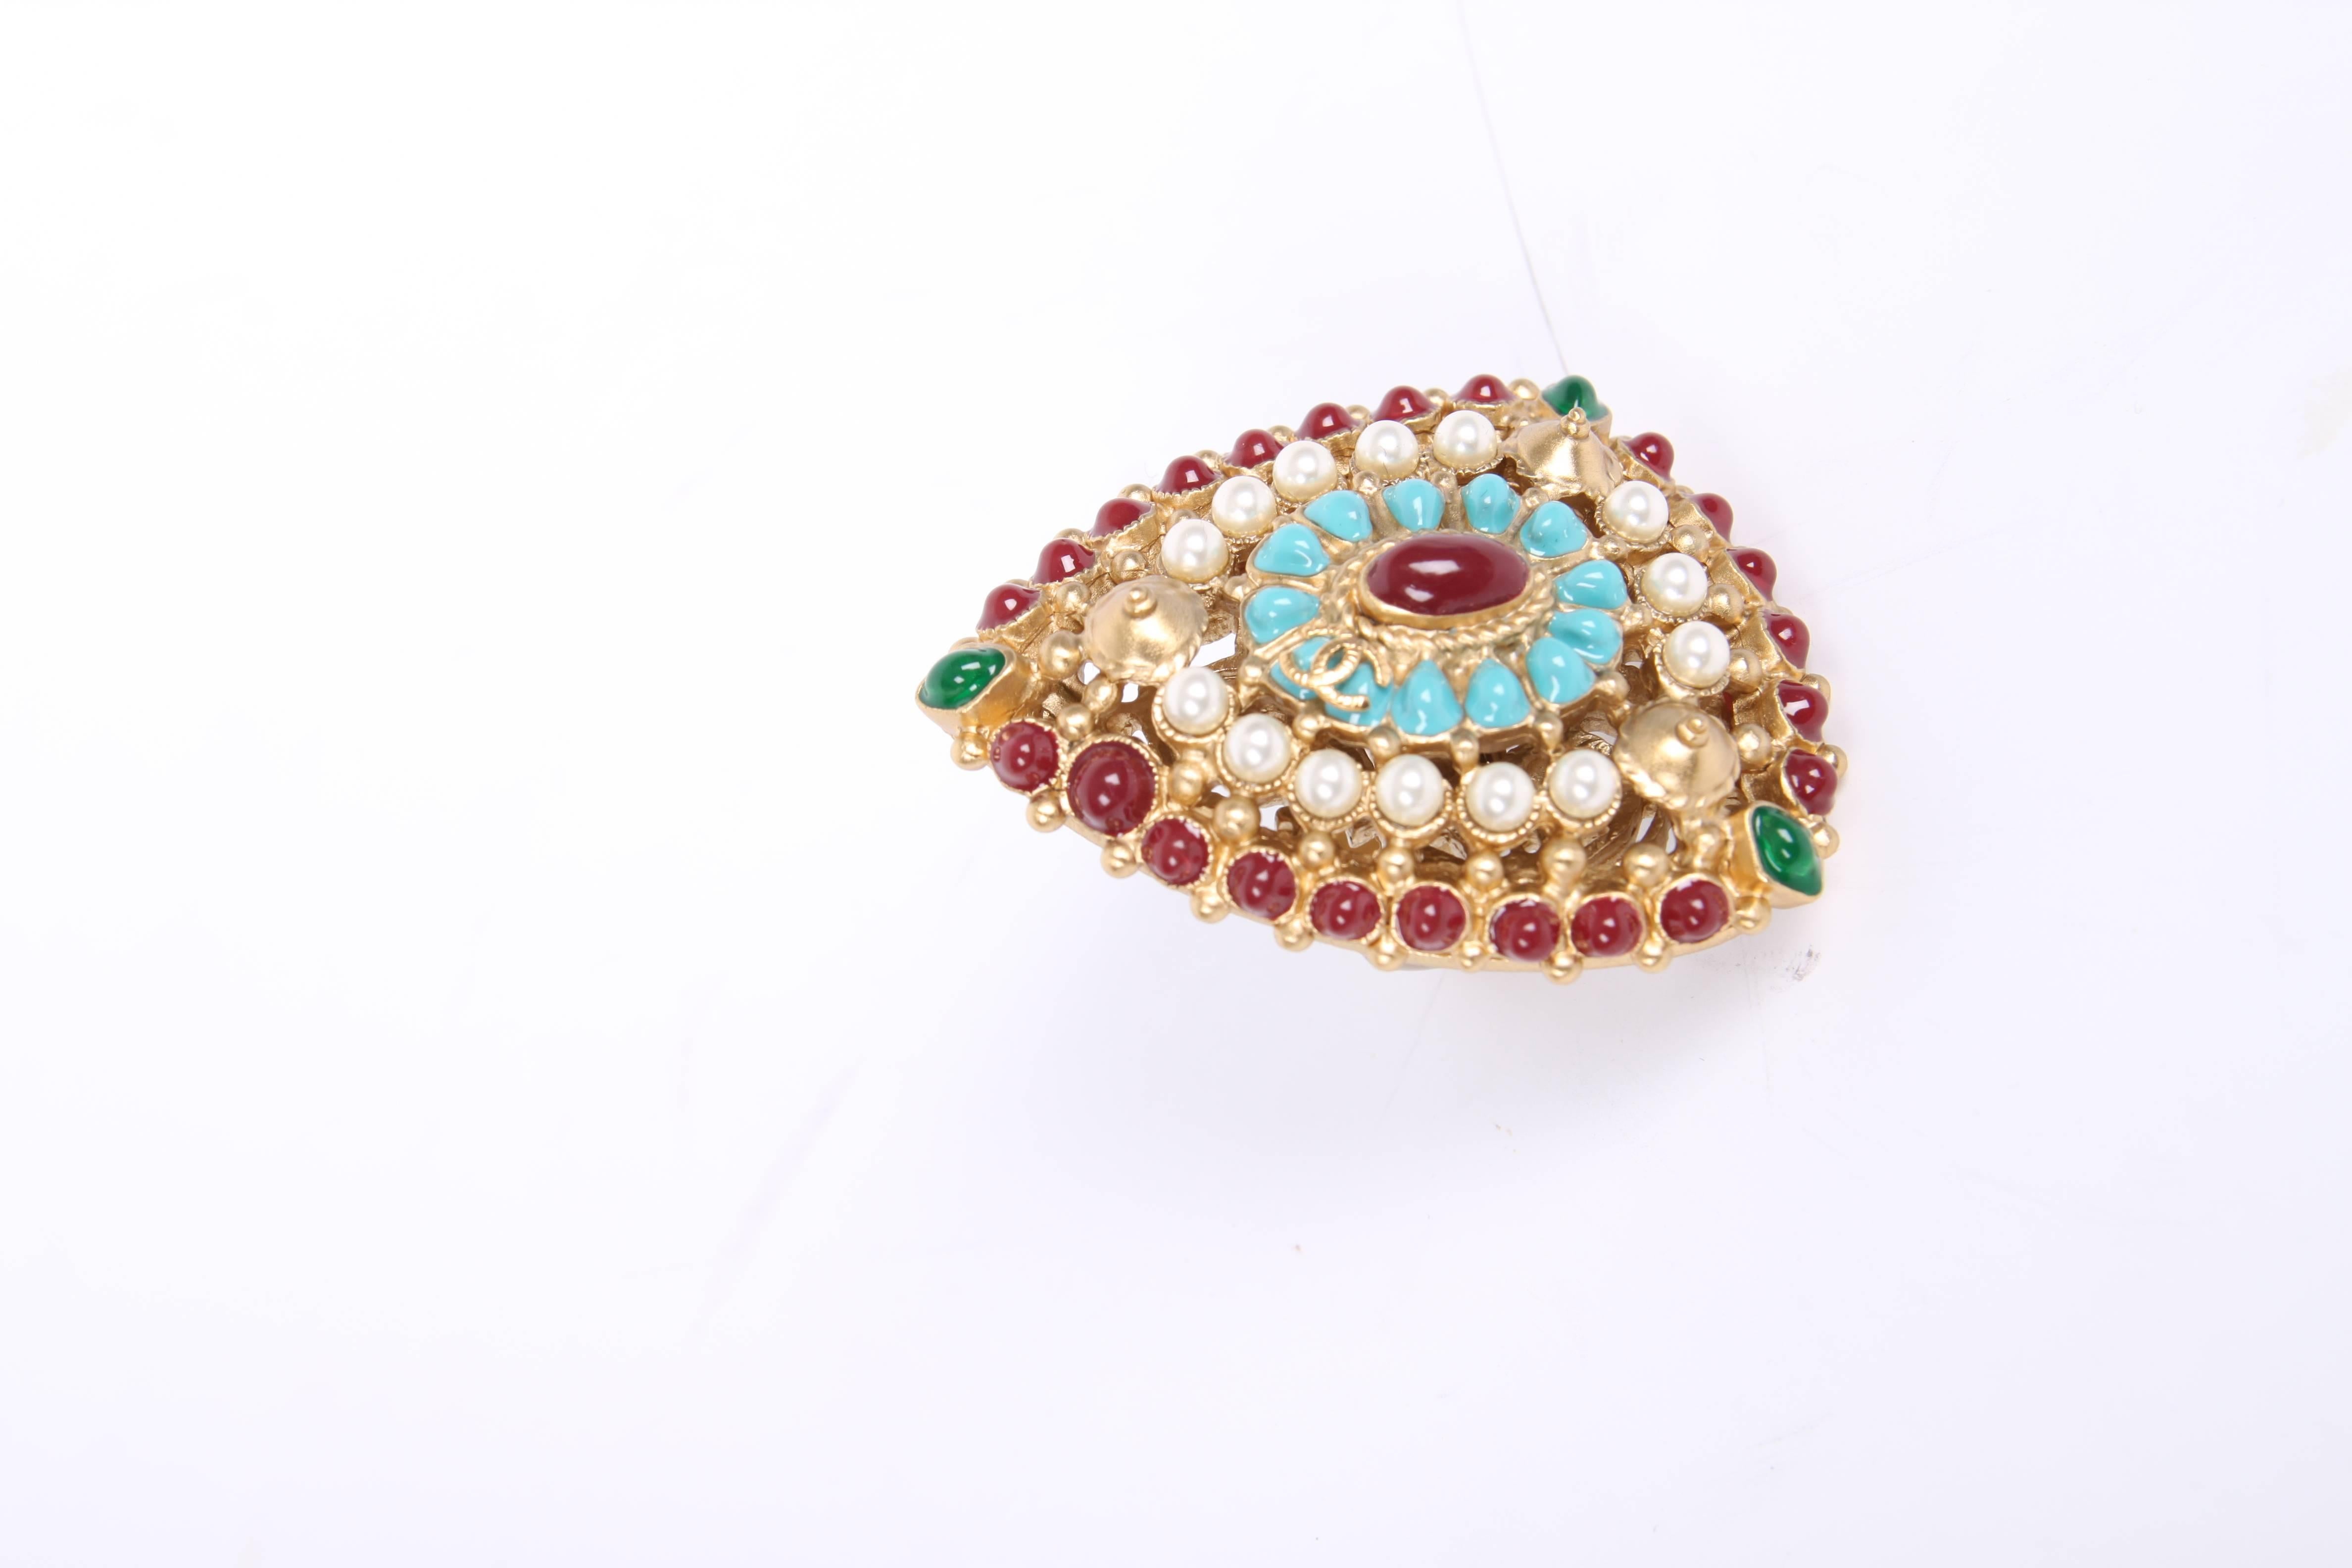 Chanel made this HUGE ring covered with pearls and dark red, turquoise and green gem stones.

A triangle shaped model, a large oval red stone in the center surrounded by turquoise stones with a gold-tone interlocking CC logo on the right. Perfect to